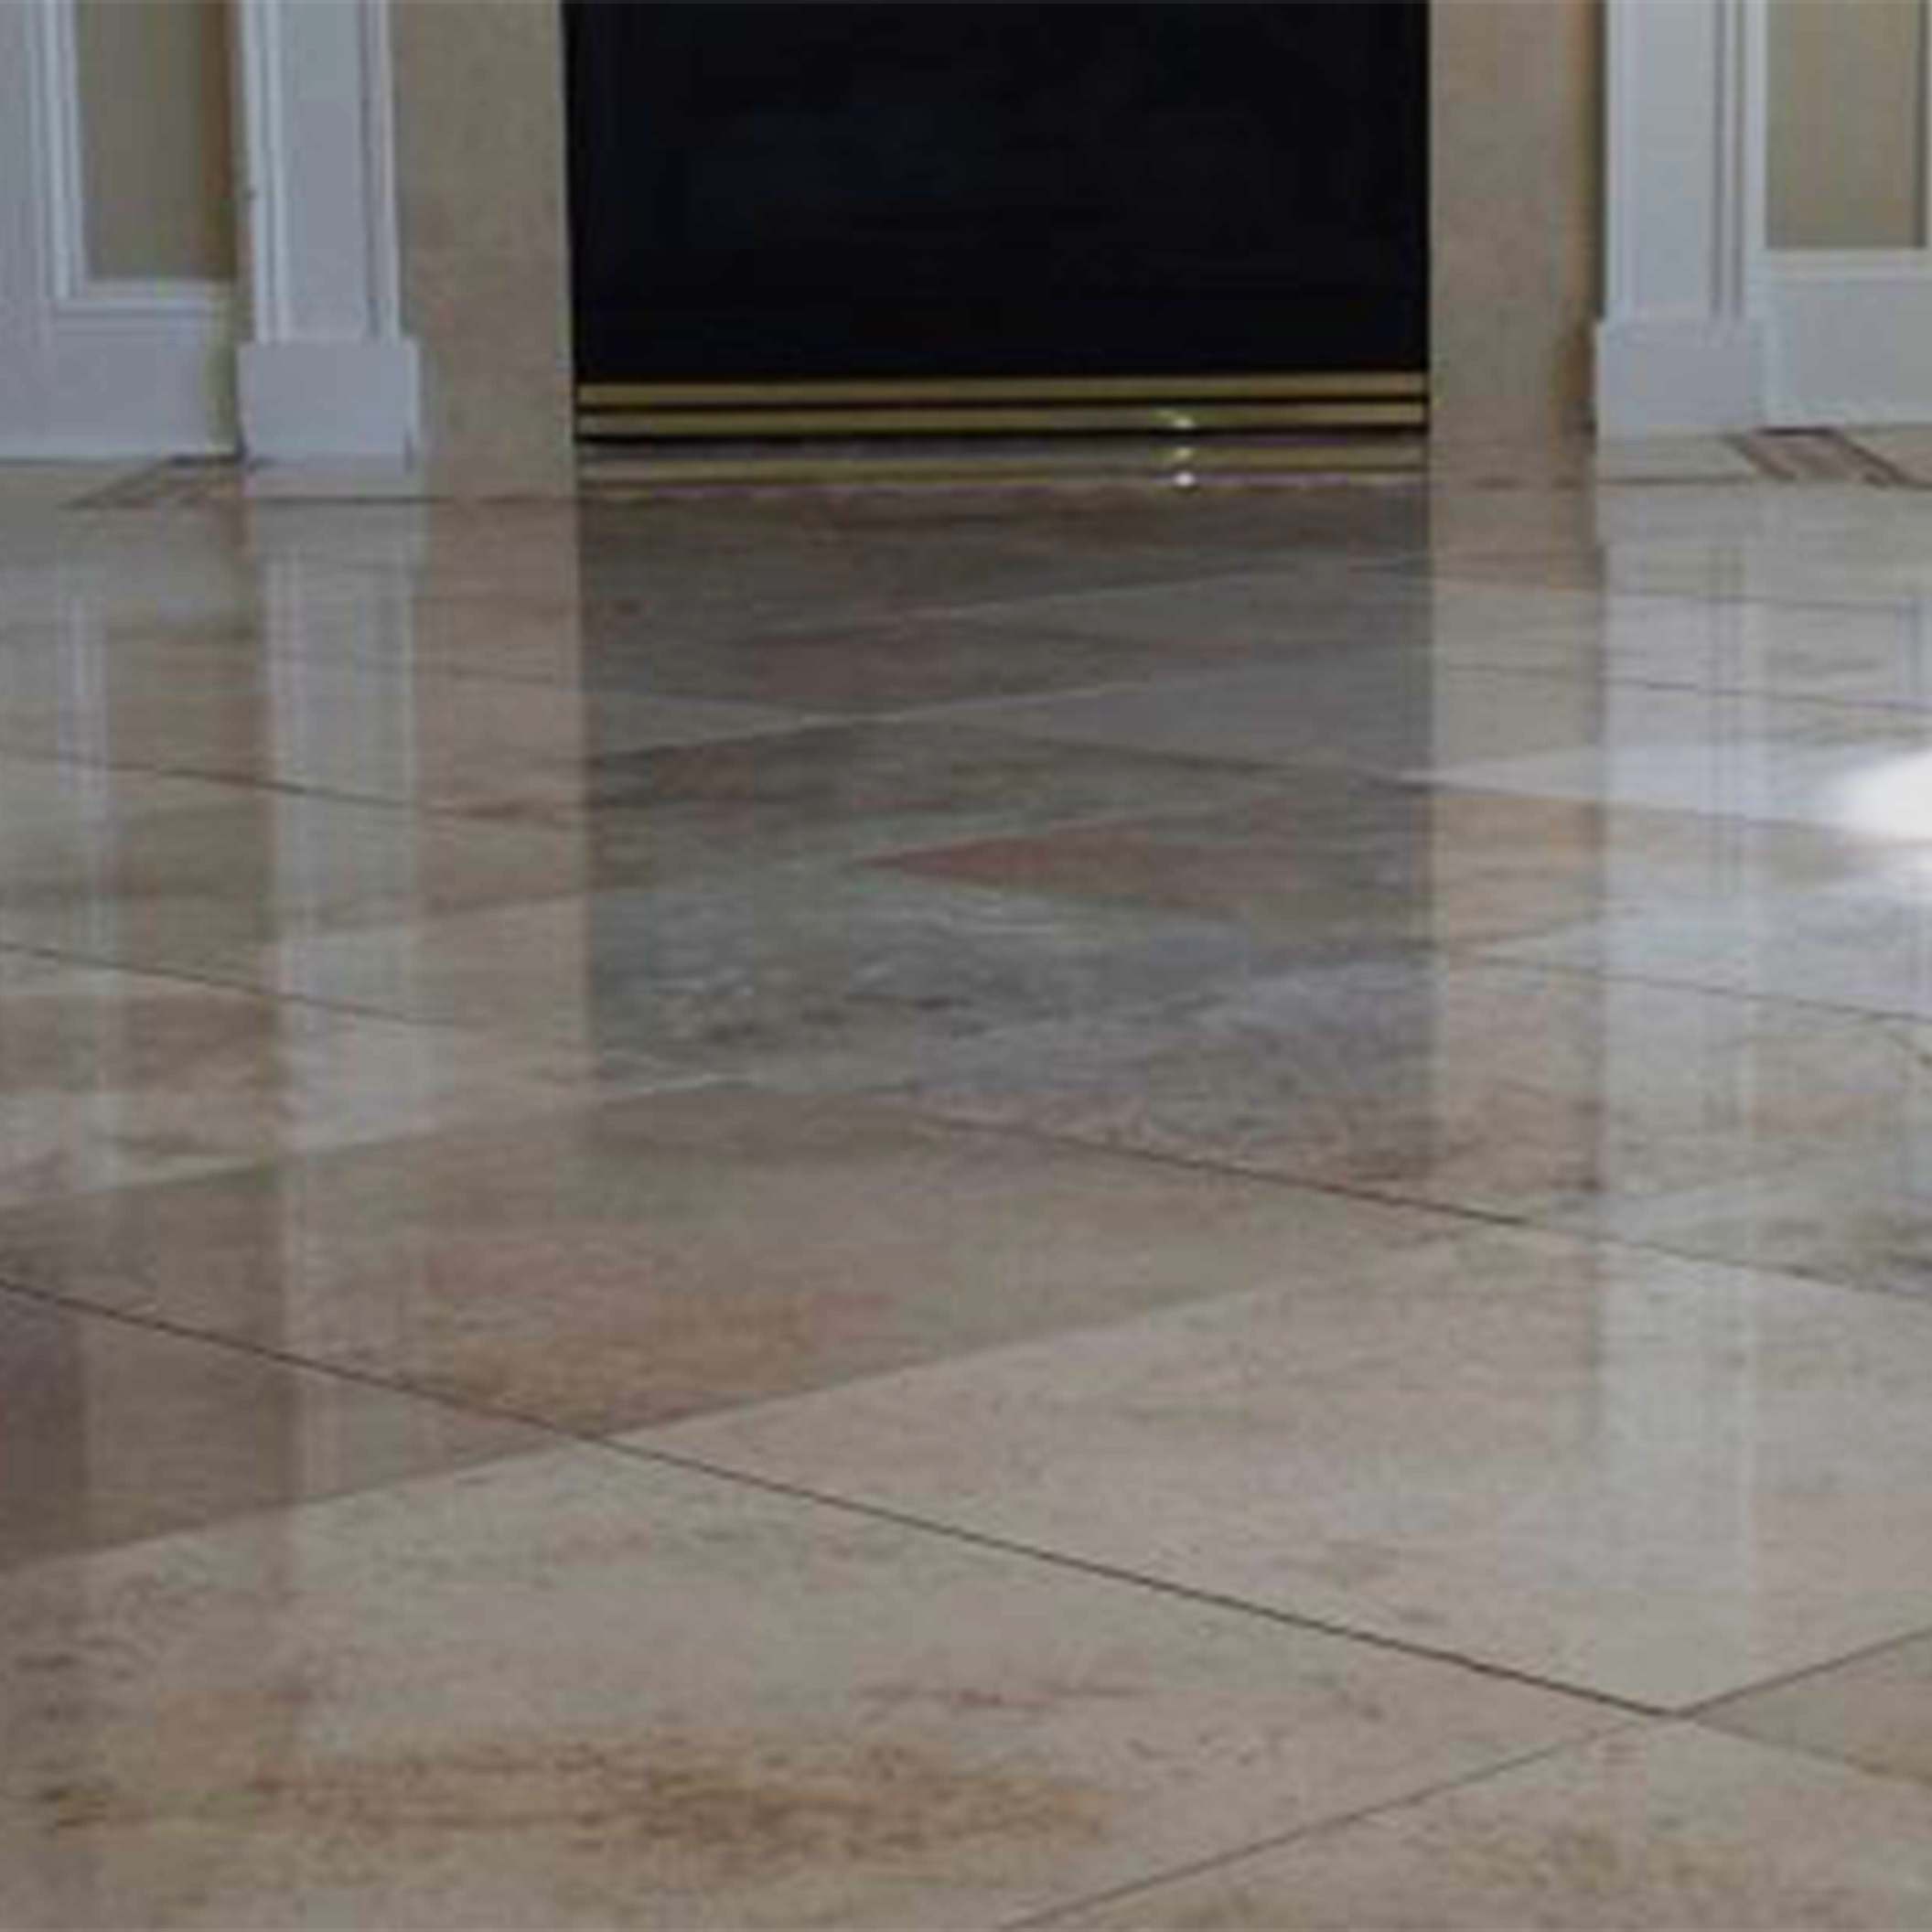 Clean and Reflective Stone Floor